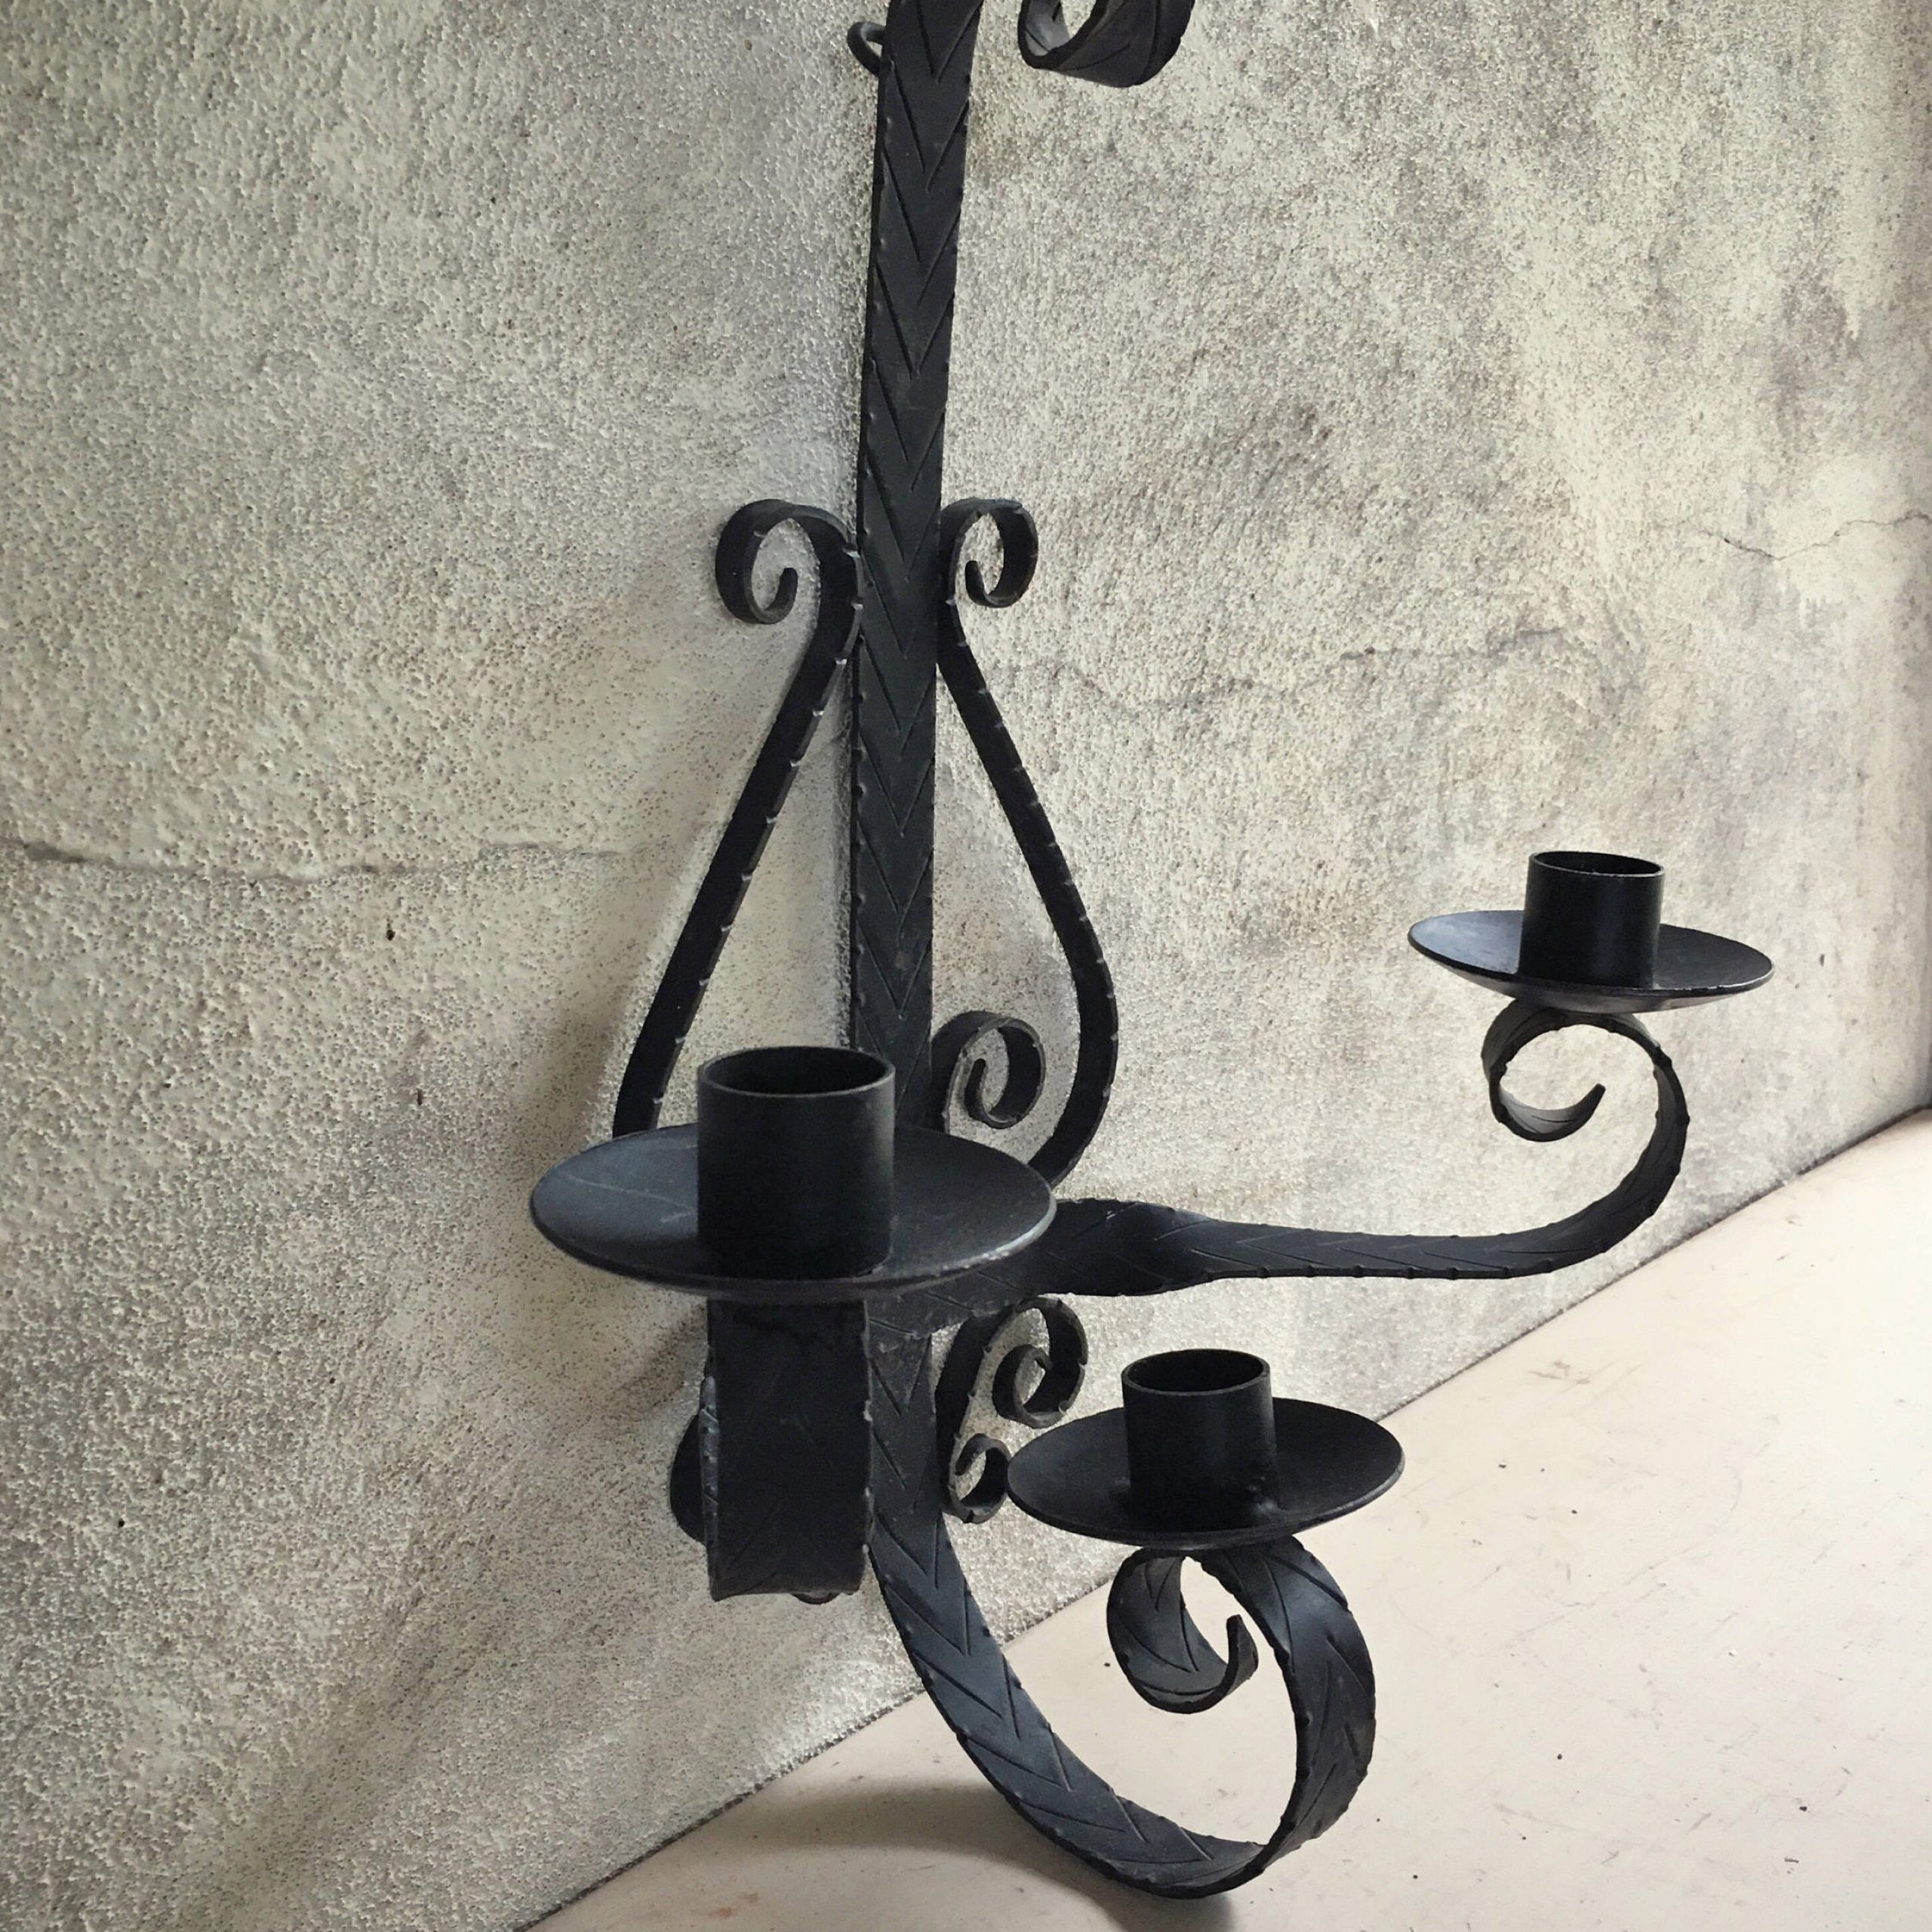 Large Vintage Mexican Hand Forged Wrought Iron Candelabra Wall Sconce With Regard To Current Hand Forged Iron Wall Art (View 14 of 20)